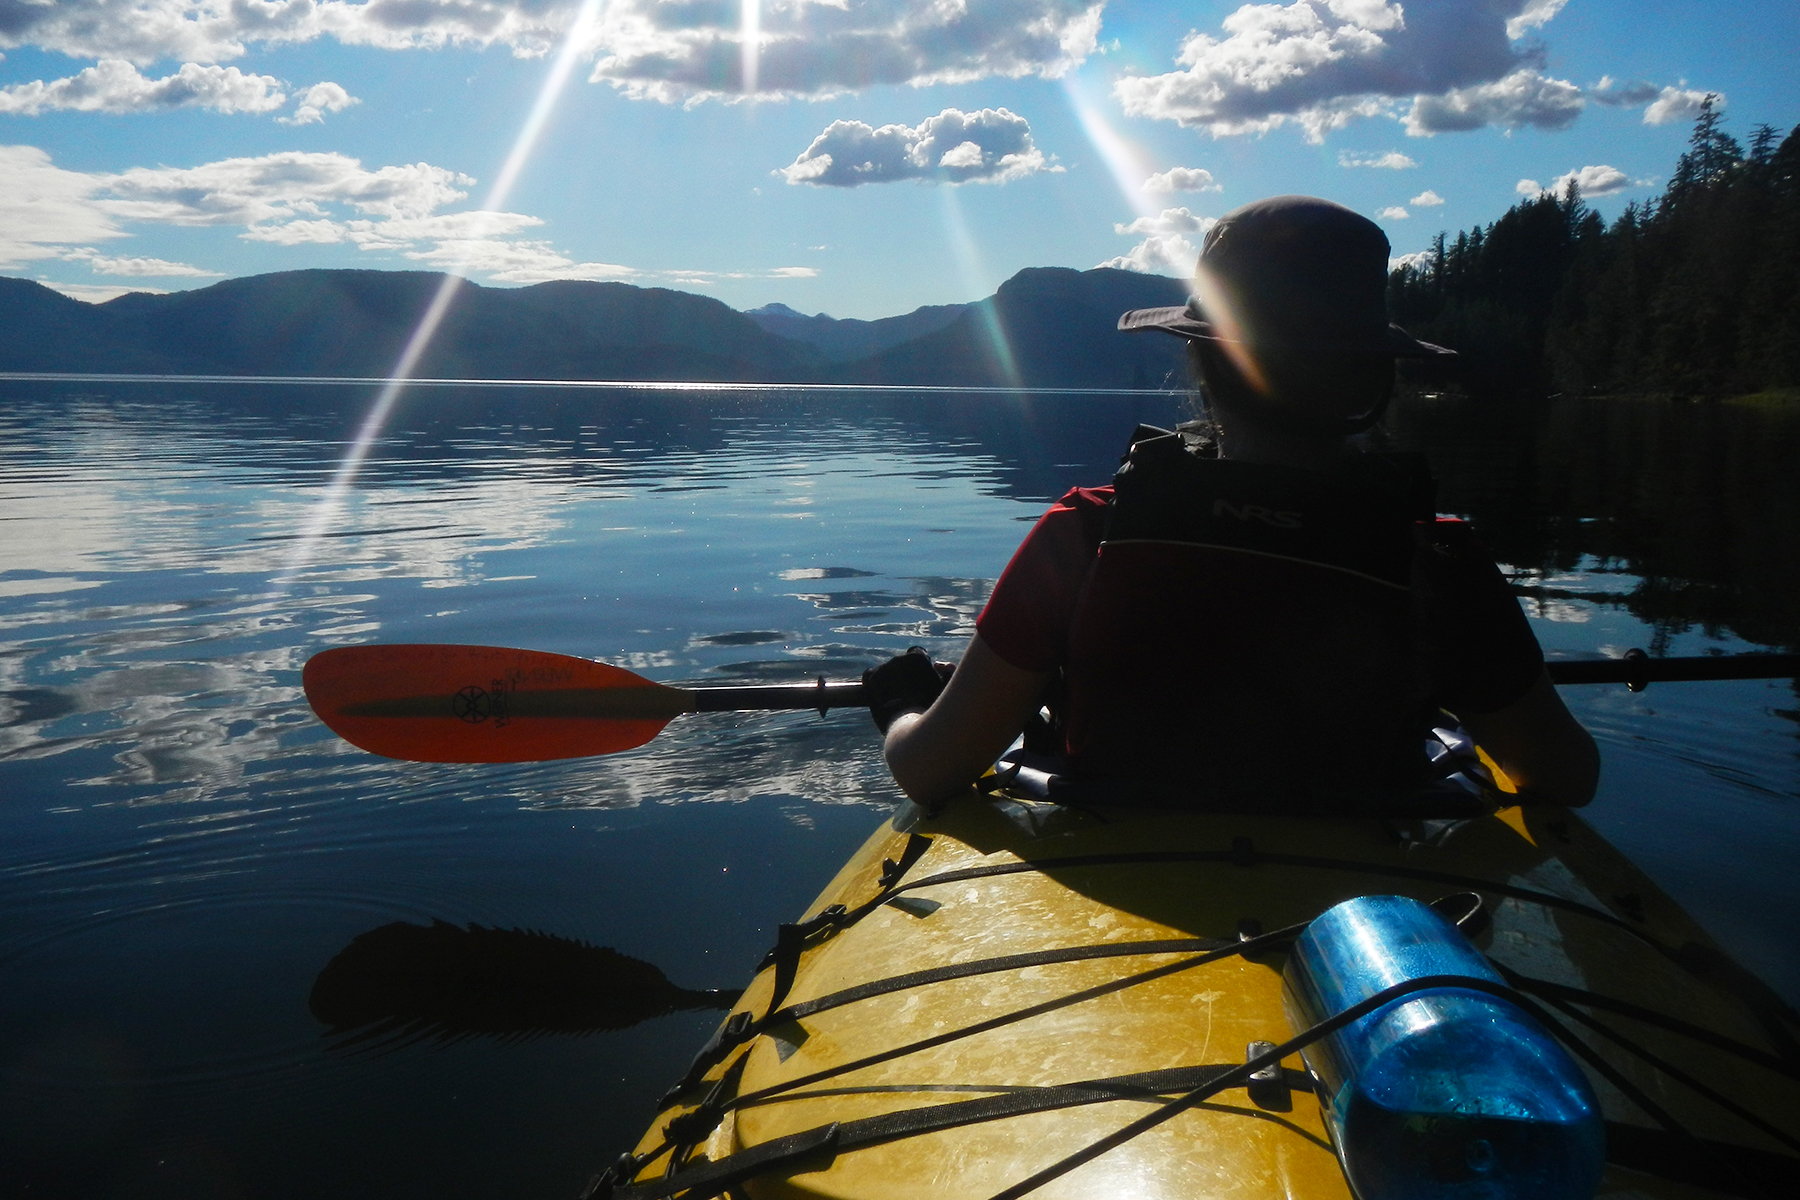  Sunshine in August. Kayaking the Misty Fjords National Monument. 